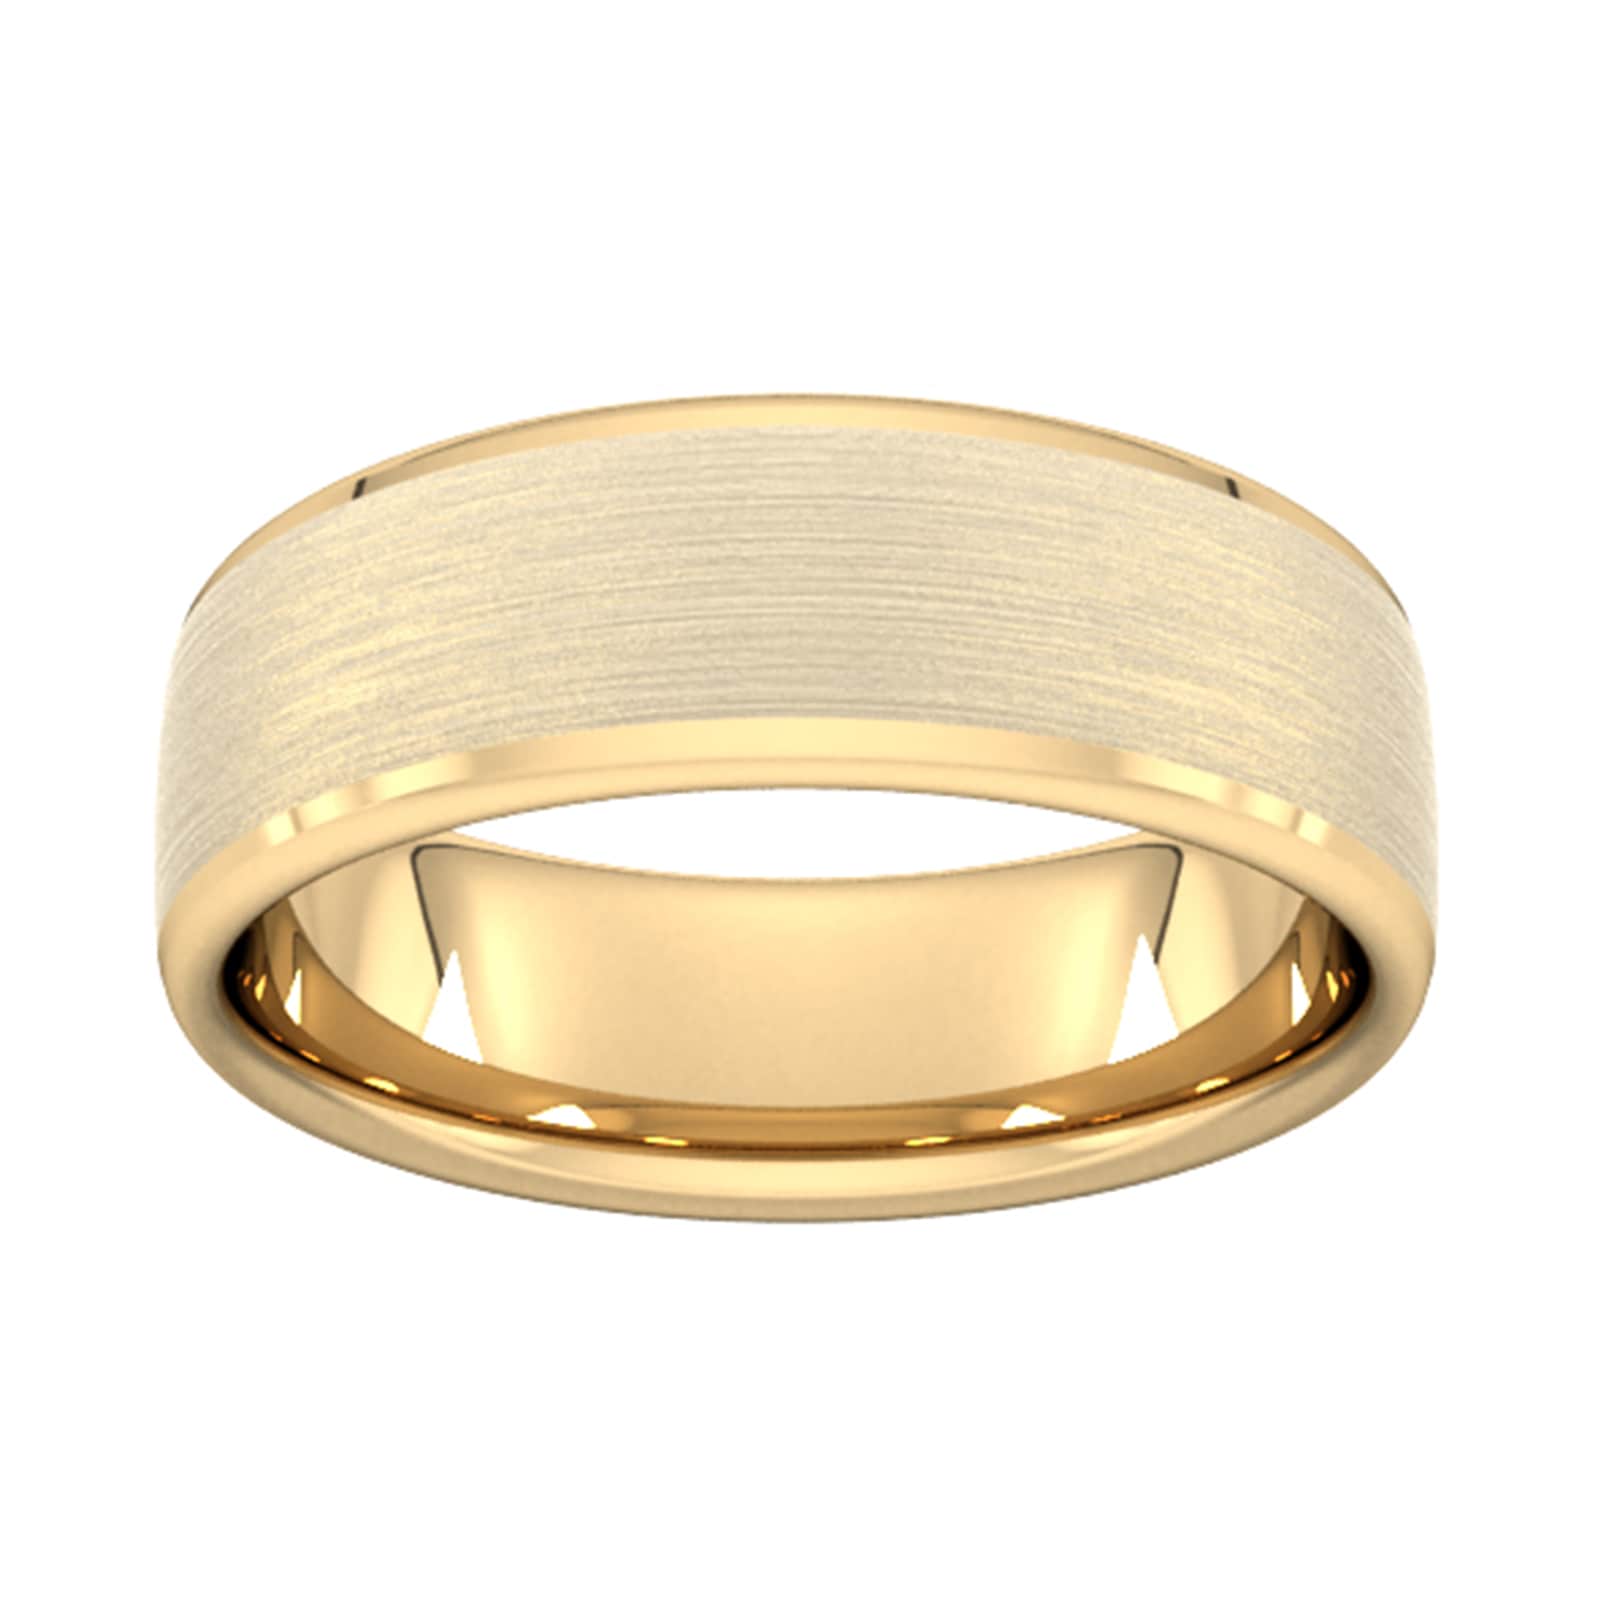 7mm Slight Court Extra Heavy Polished Chamfered Edges With Matt Centre Wedding Ring In 18 Carat Yellow Gold - Ring Size K